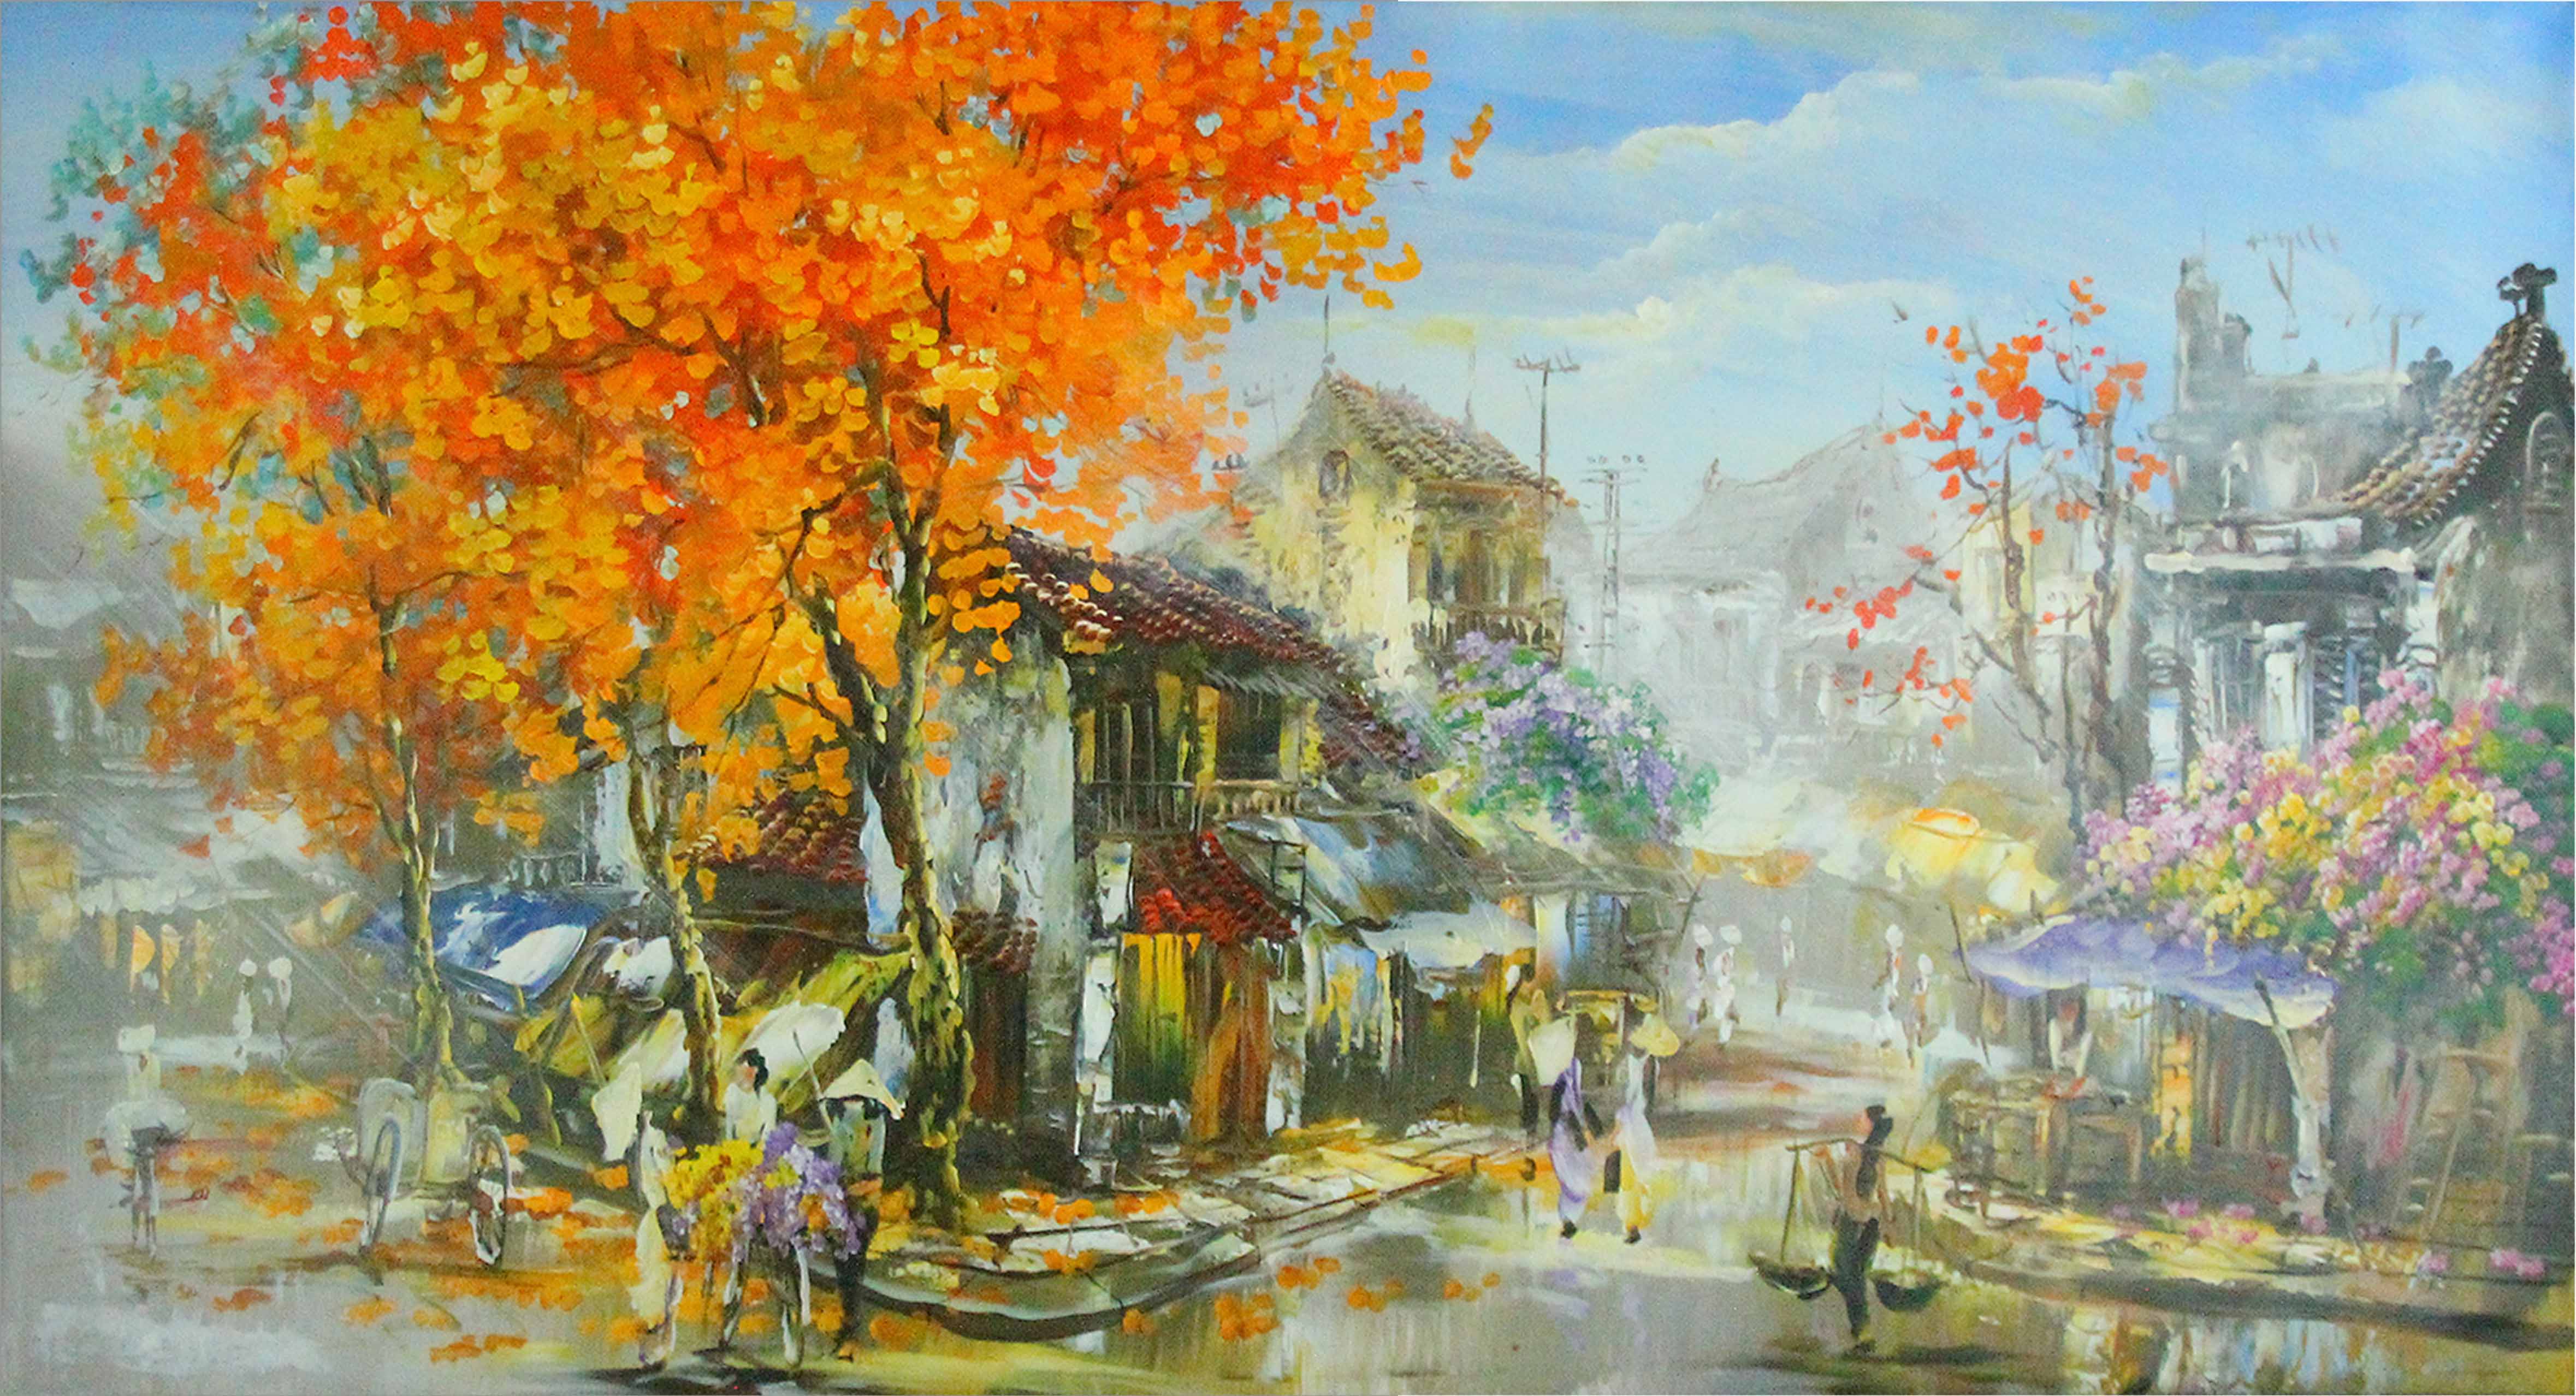 Oil painting of Old town - TSD33LHAR